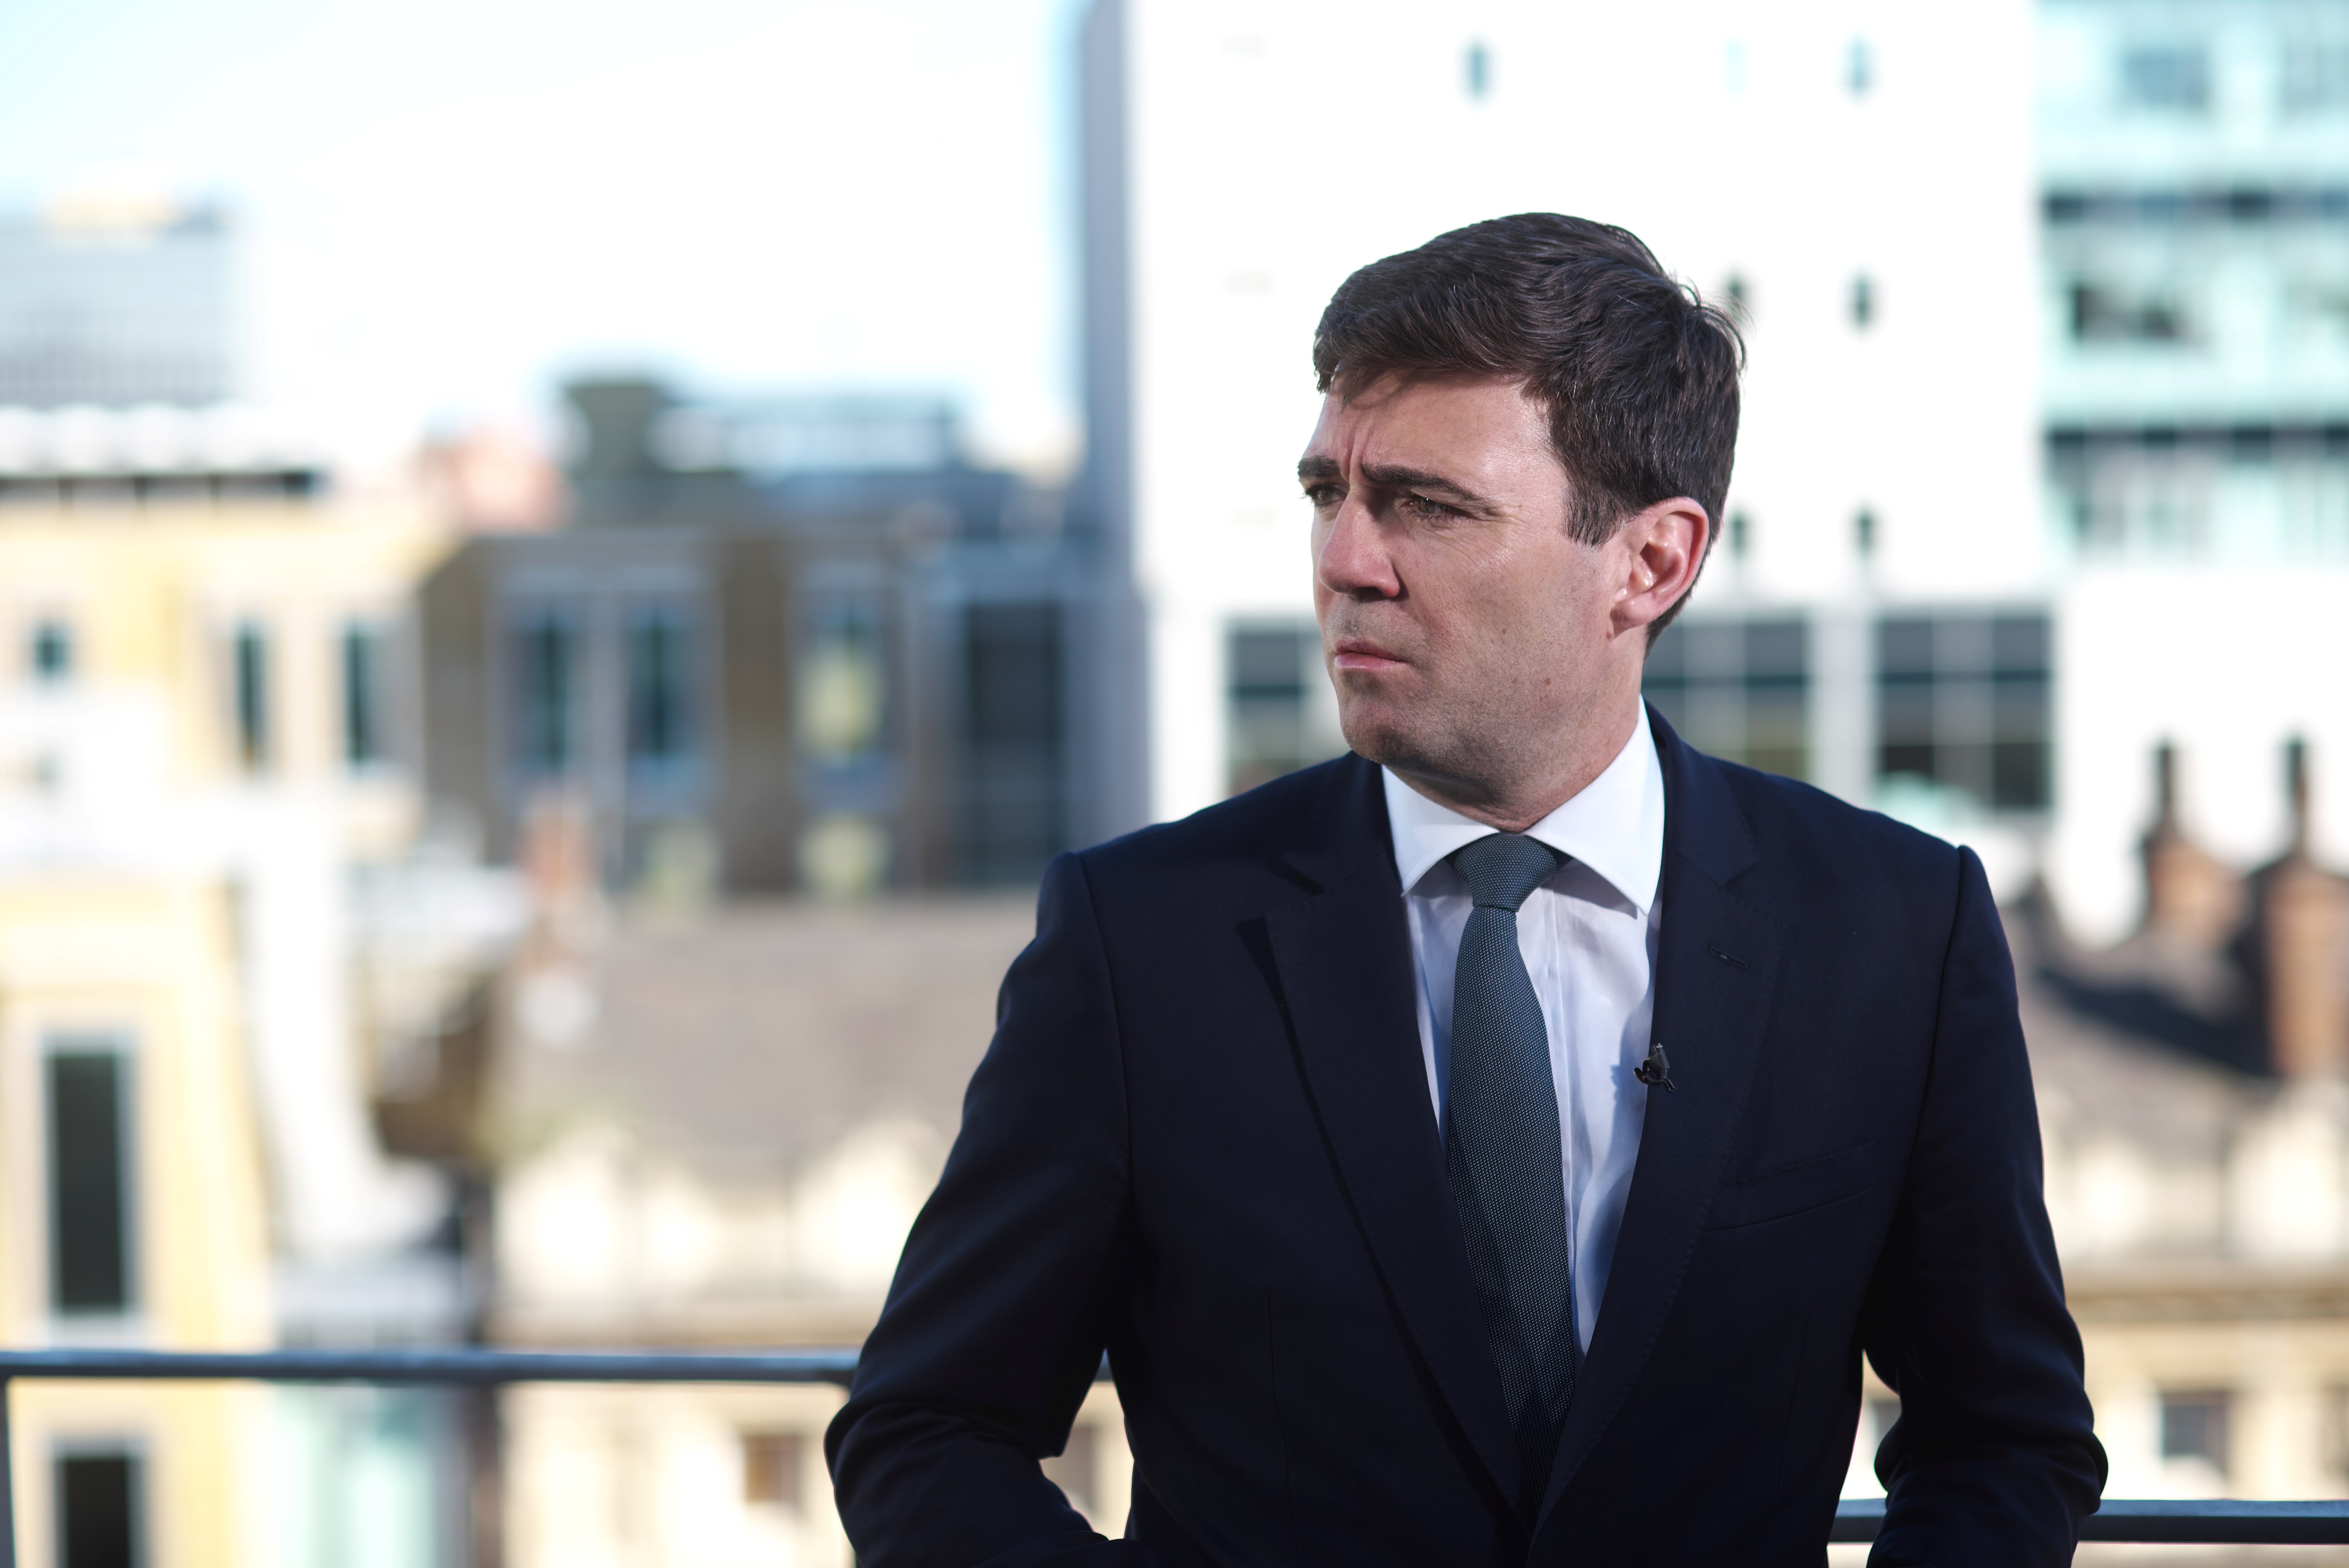 Mayor of Greater Manchester, Andy Burnham, in front of Manchester skyline